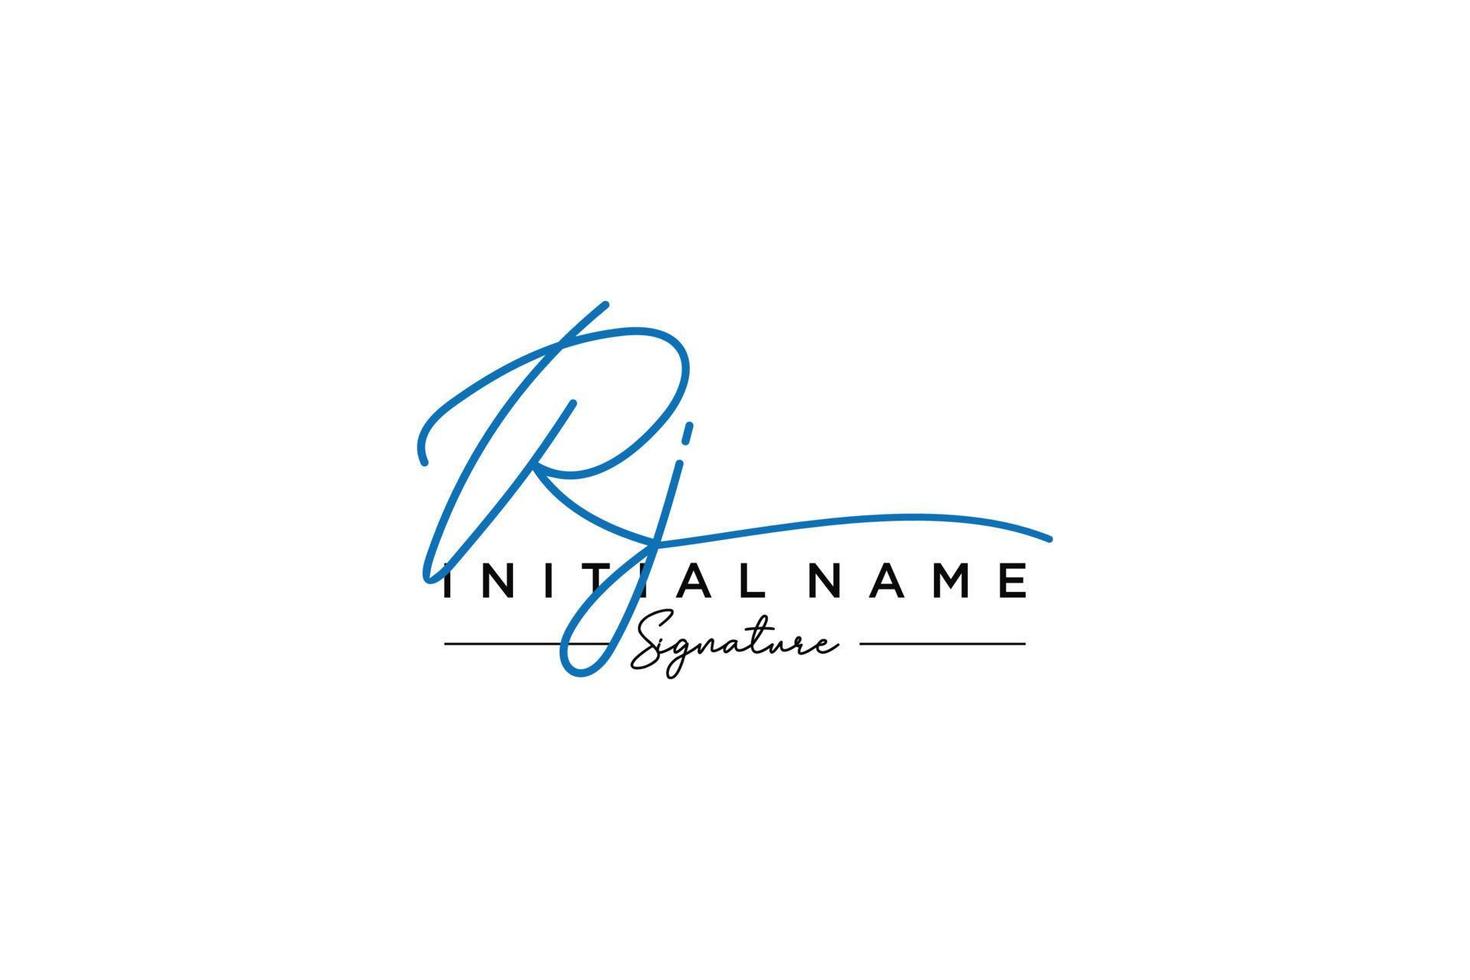 Initial RJ signature logo template vector. Hand drawn Calligraphy lettering Vector illustration.